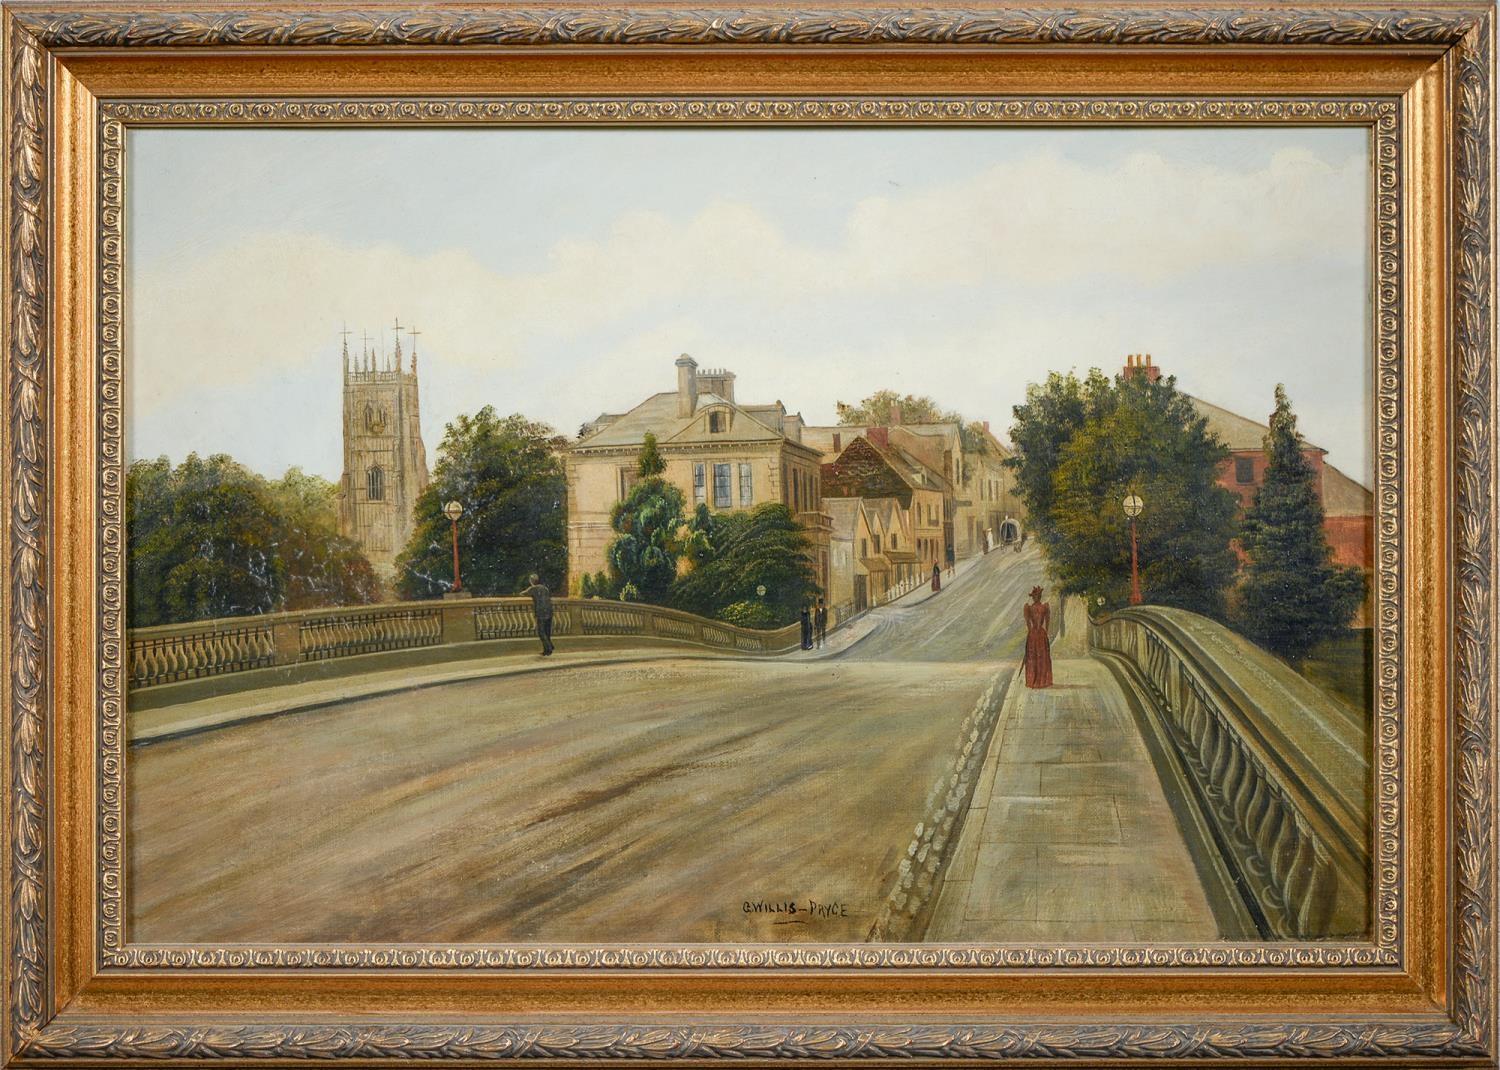 workman bridge over the river avon  in Evesham worcestershire.
  Workman Bridge was erected in 1856 to replace a medieval bridge. It was named after Henry Workman, long-time mayor of Evesham.
oil on canvas by George Willis Pryce, dating late 19th